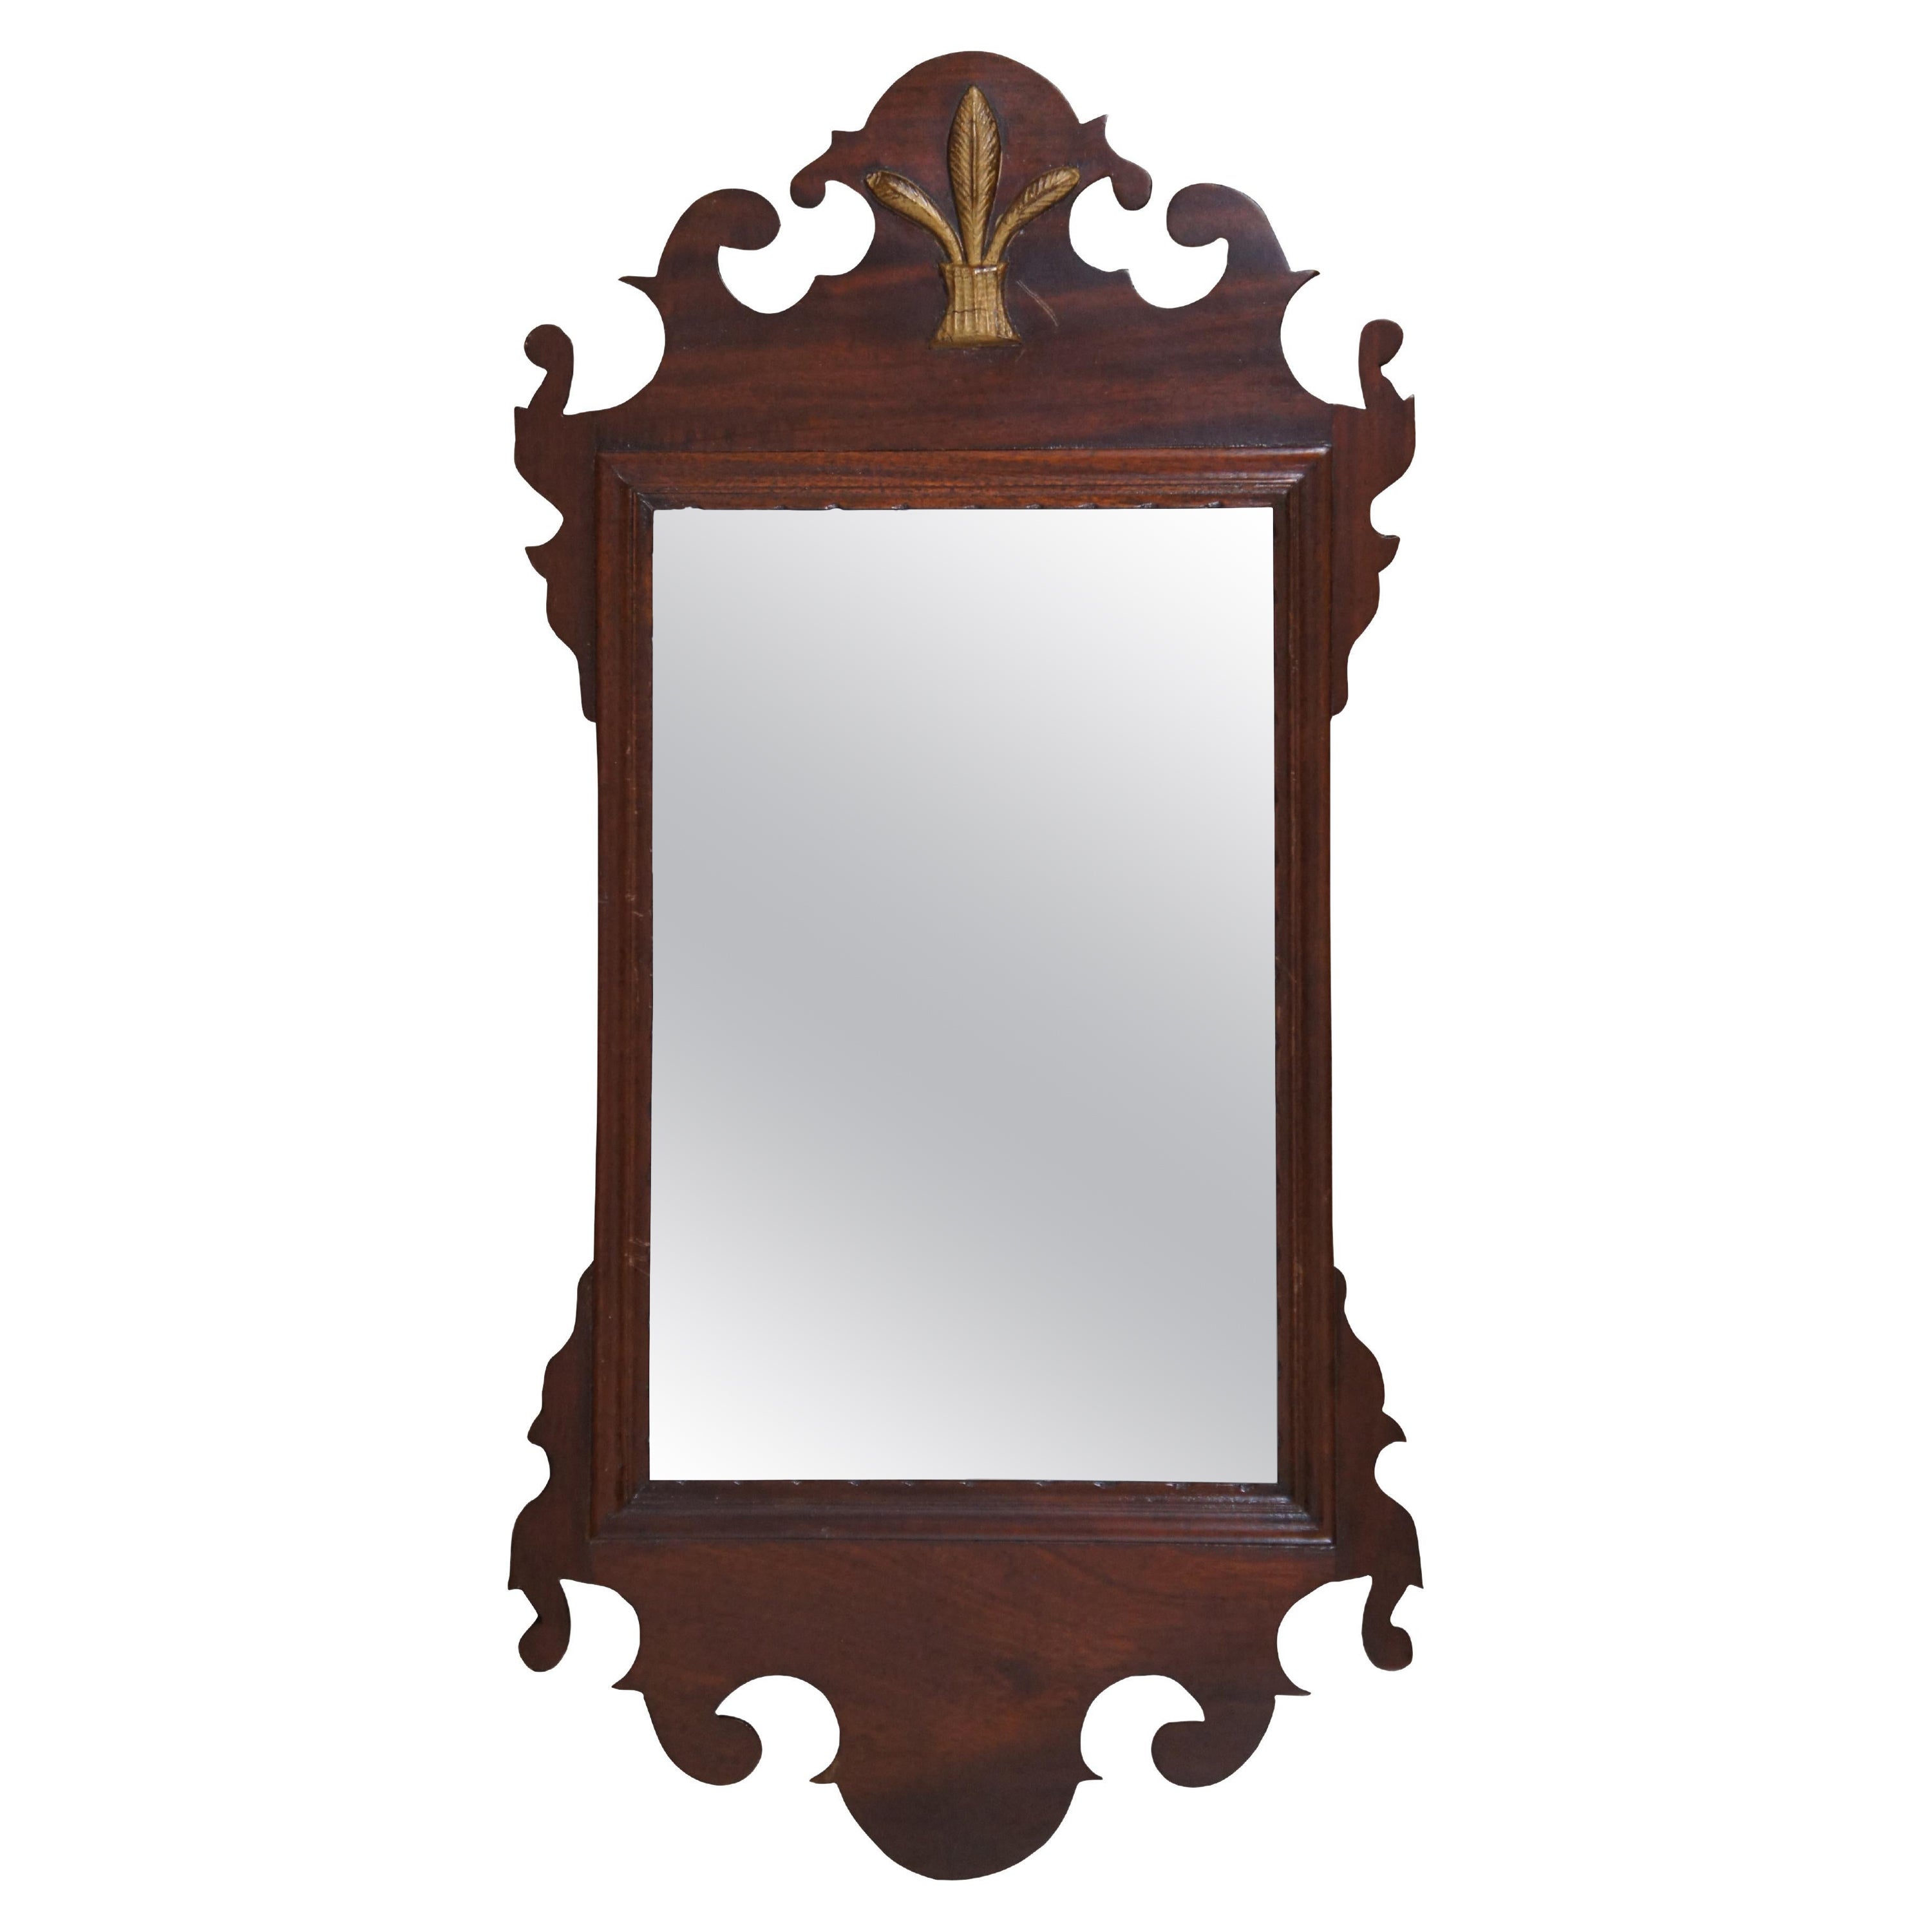 Antique American Federal Mahogany Feathers Plume Wall Vanity Mirror 26" For Sale